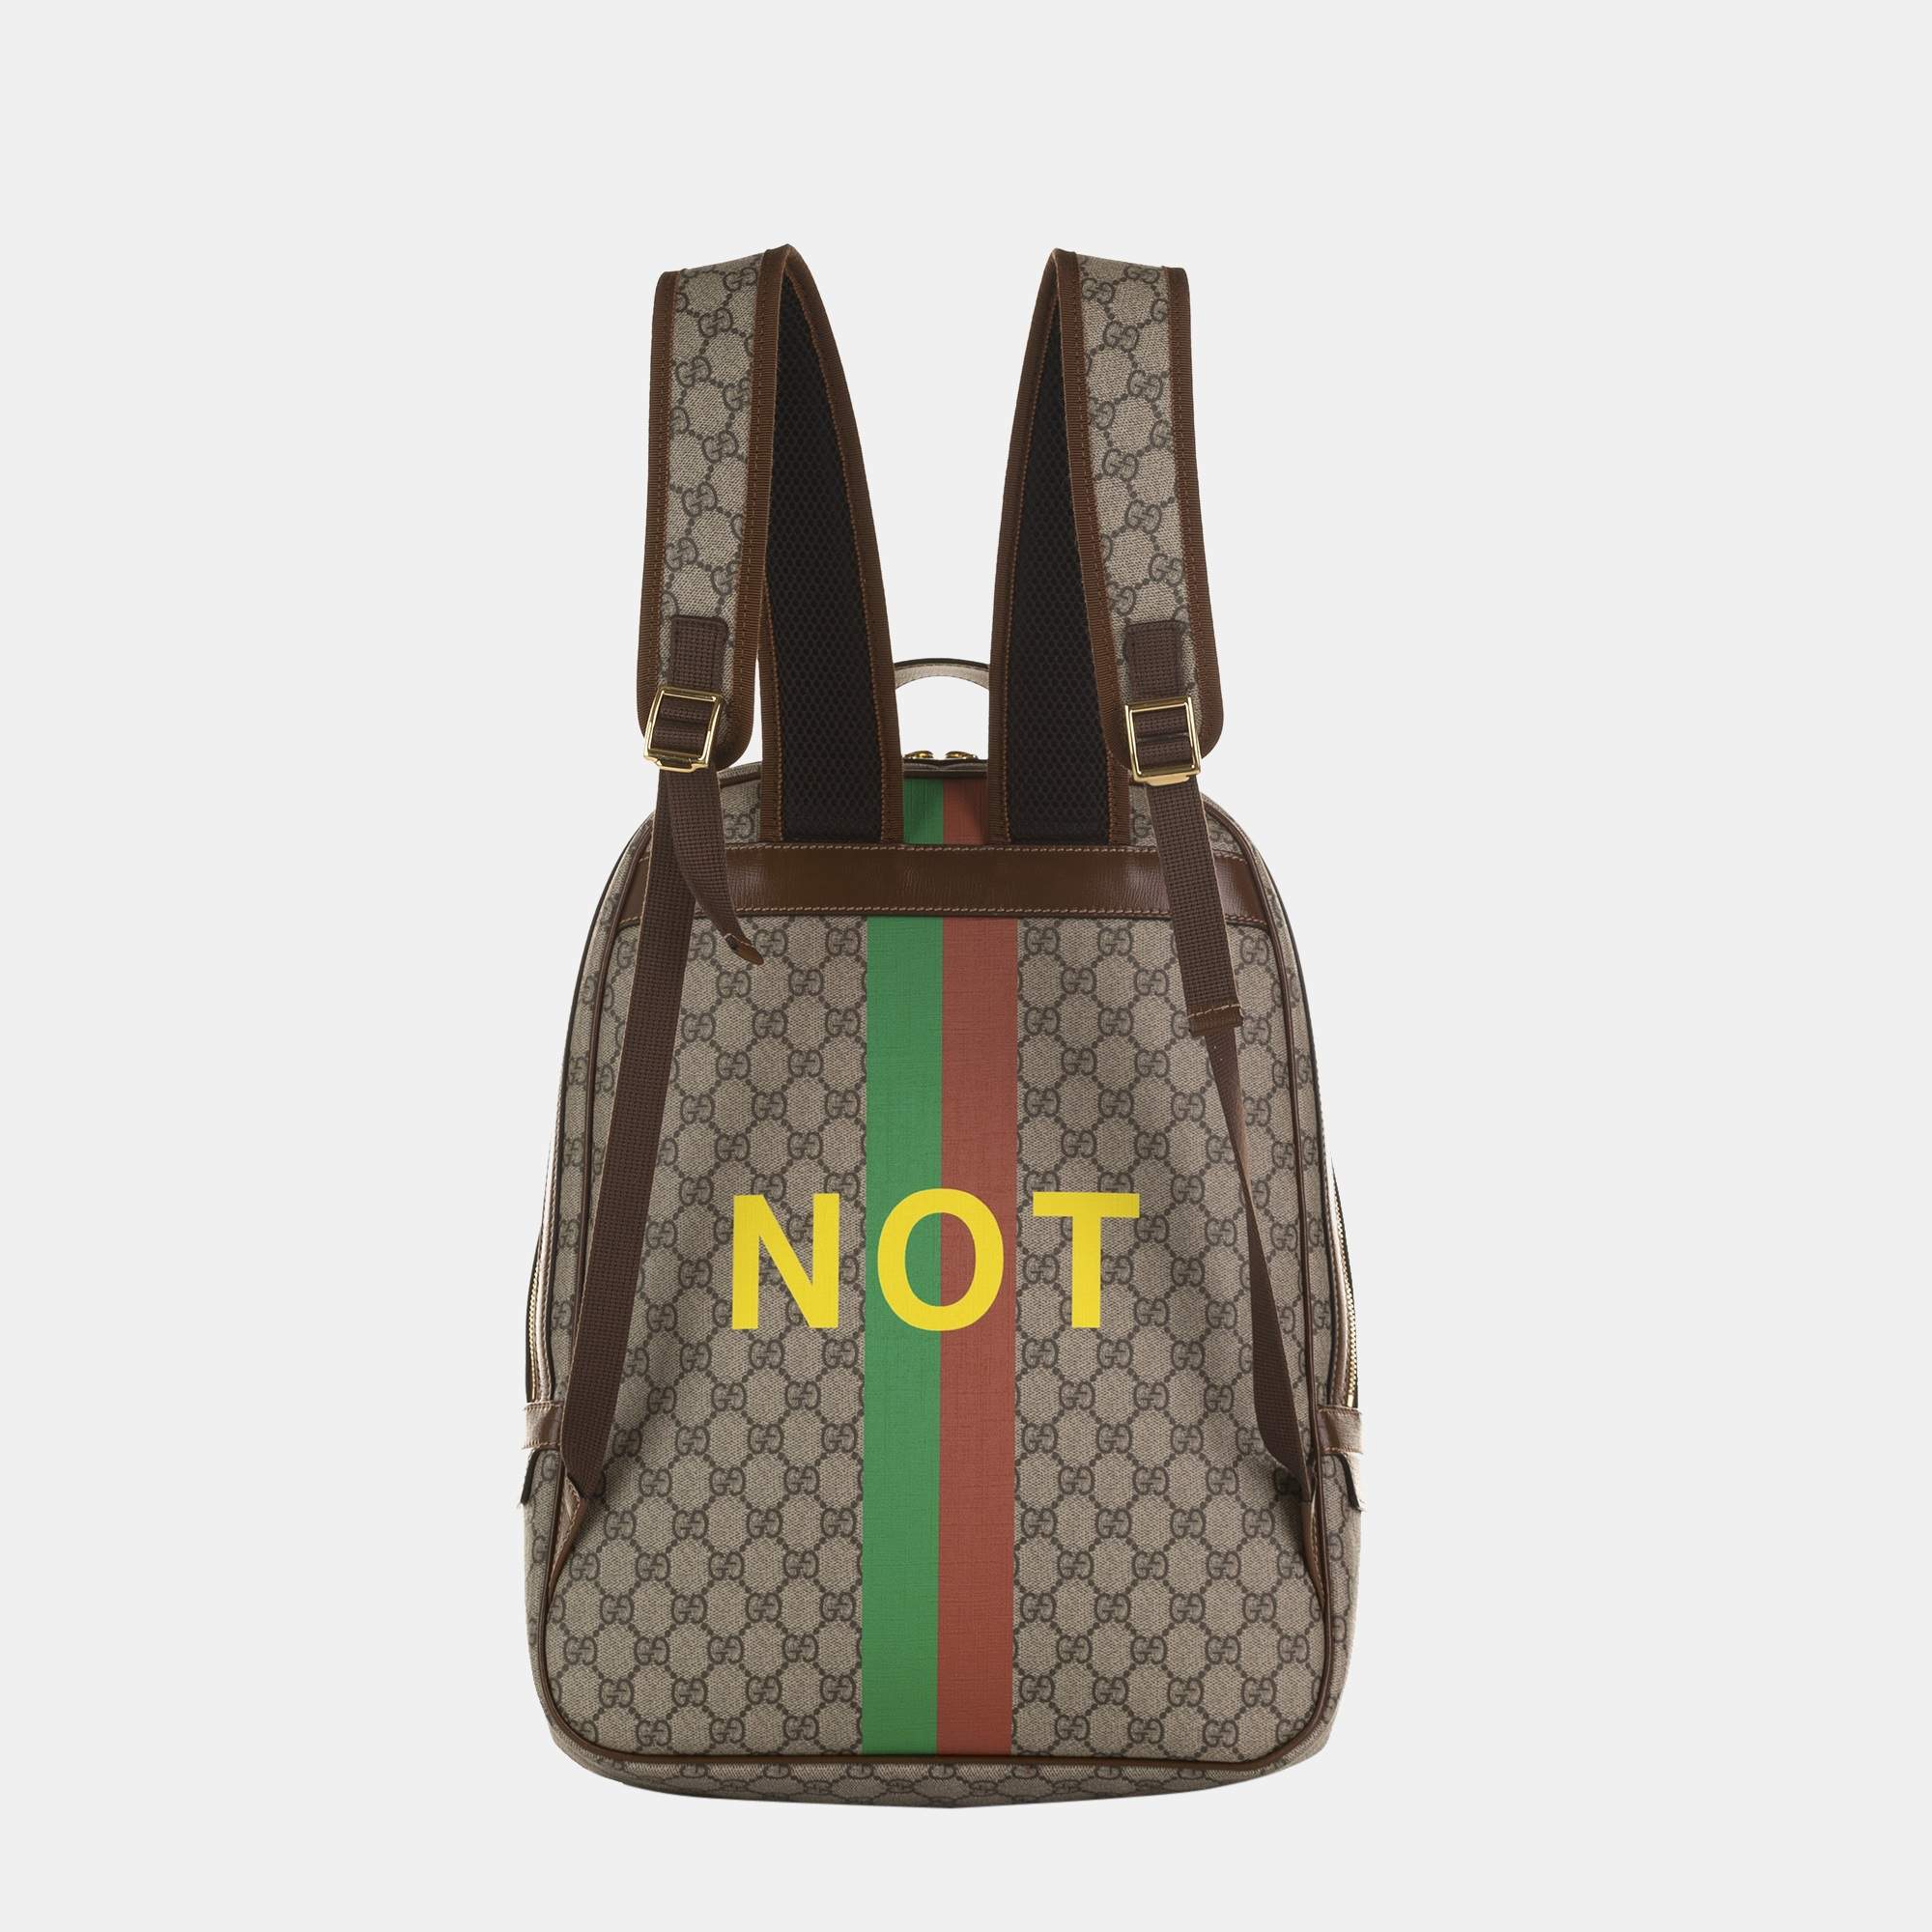 Which second hand backpack (Gucci vs Vintage Louis Vuitton) should